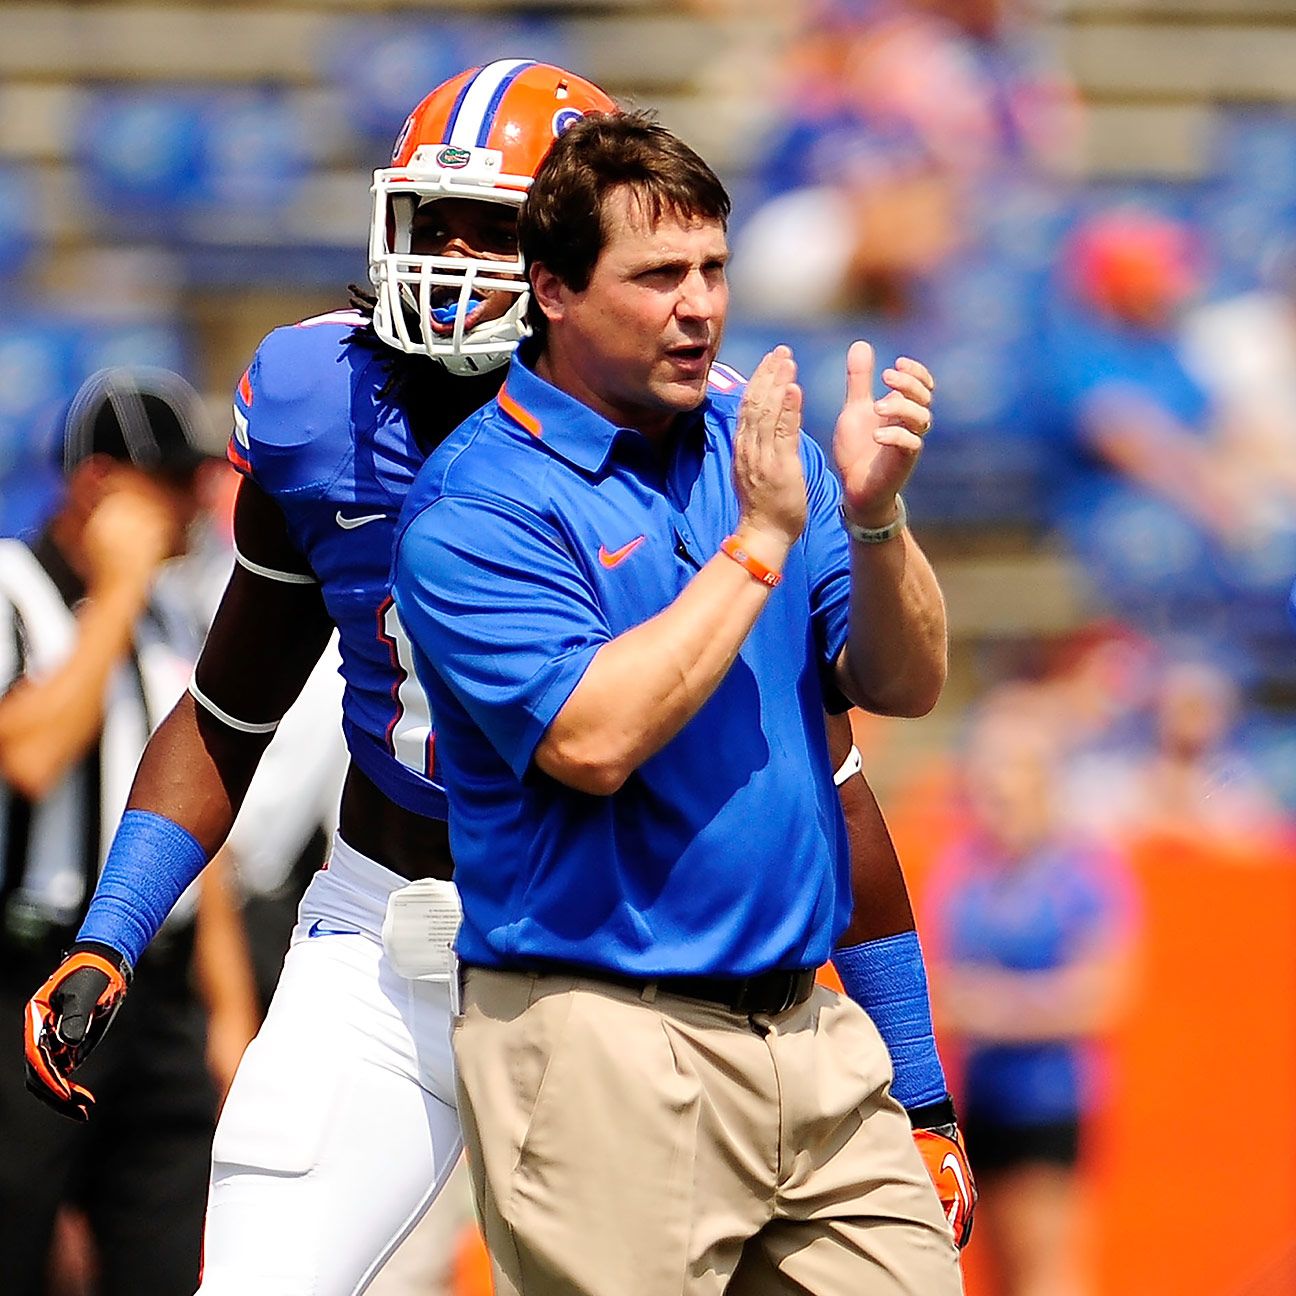 Adversity nothing new for Florida Gators coach Will Muschamp